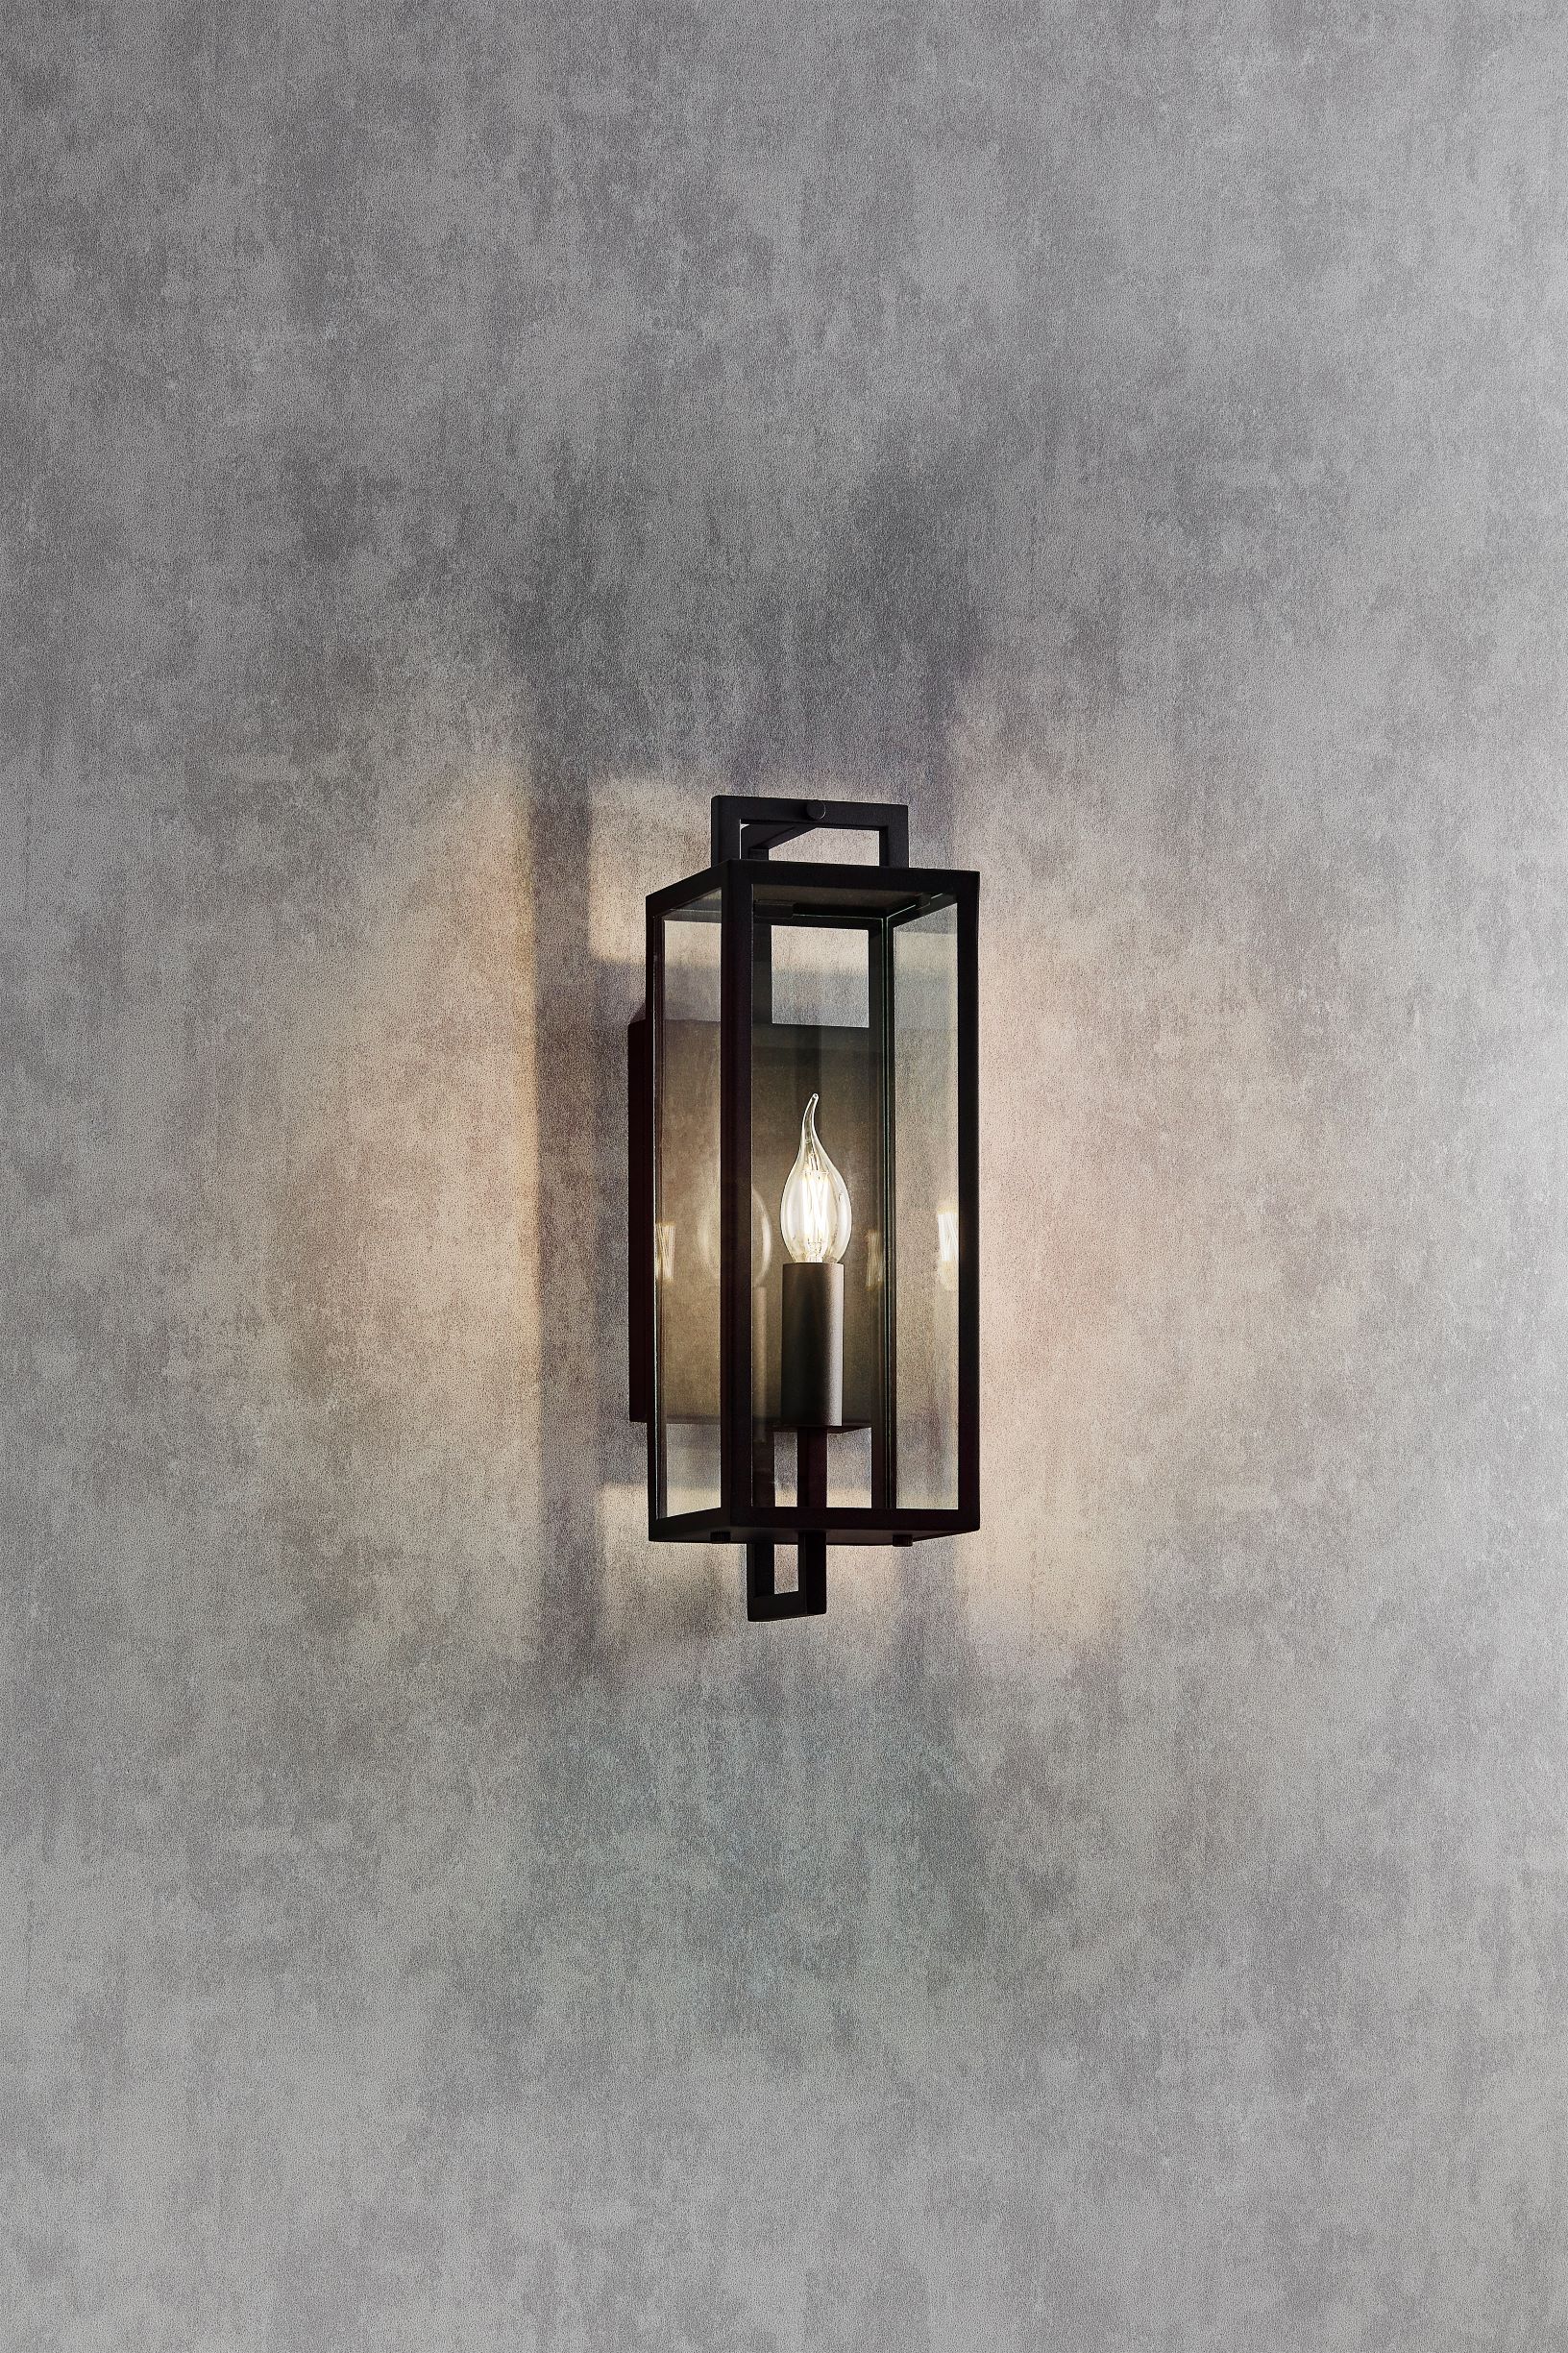 Cologne wall sconce 1904 IP44 | exterior wall sconce ip44